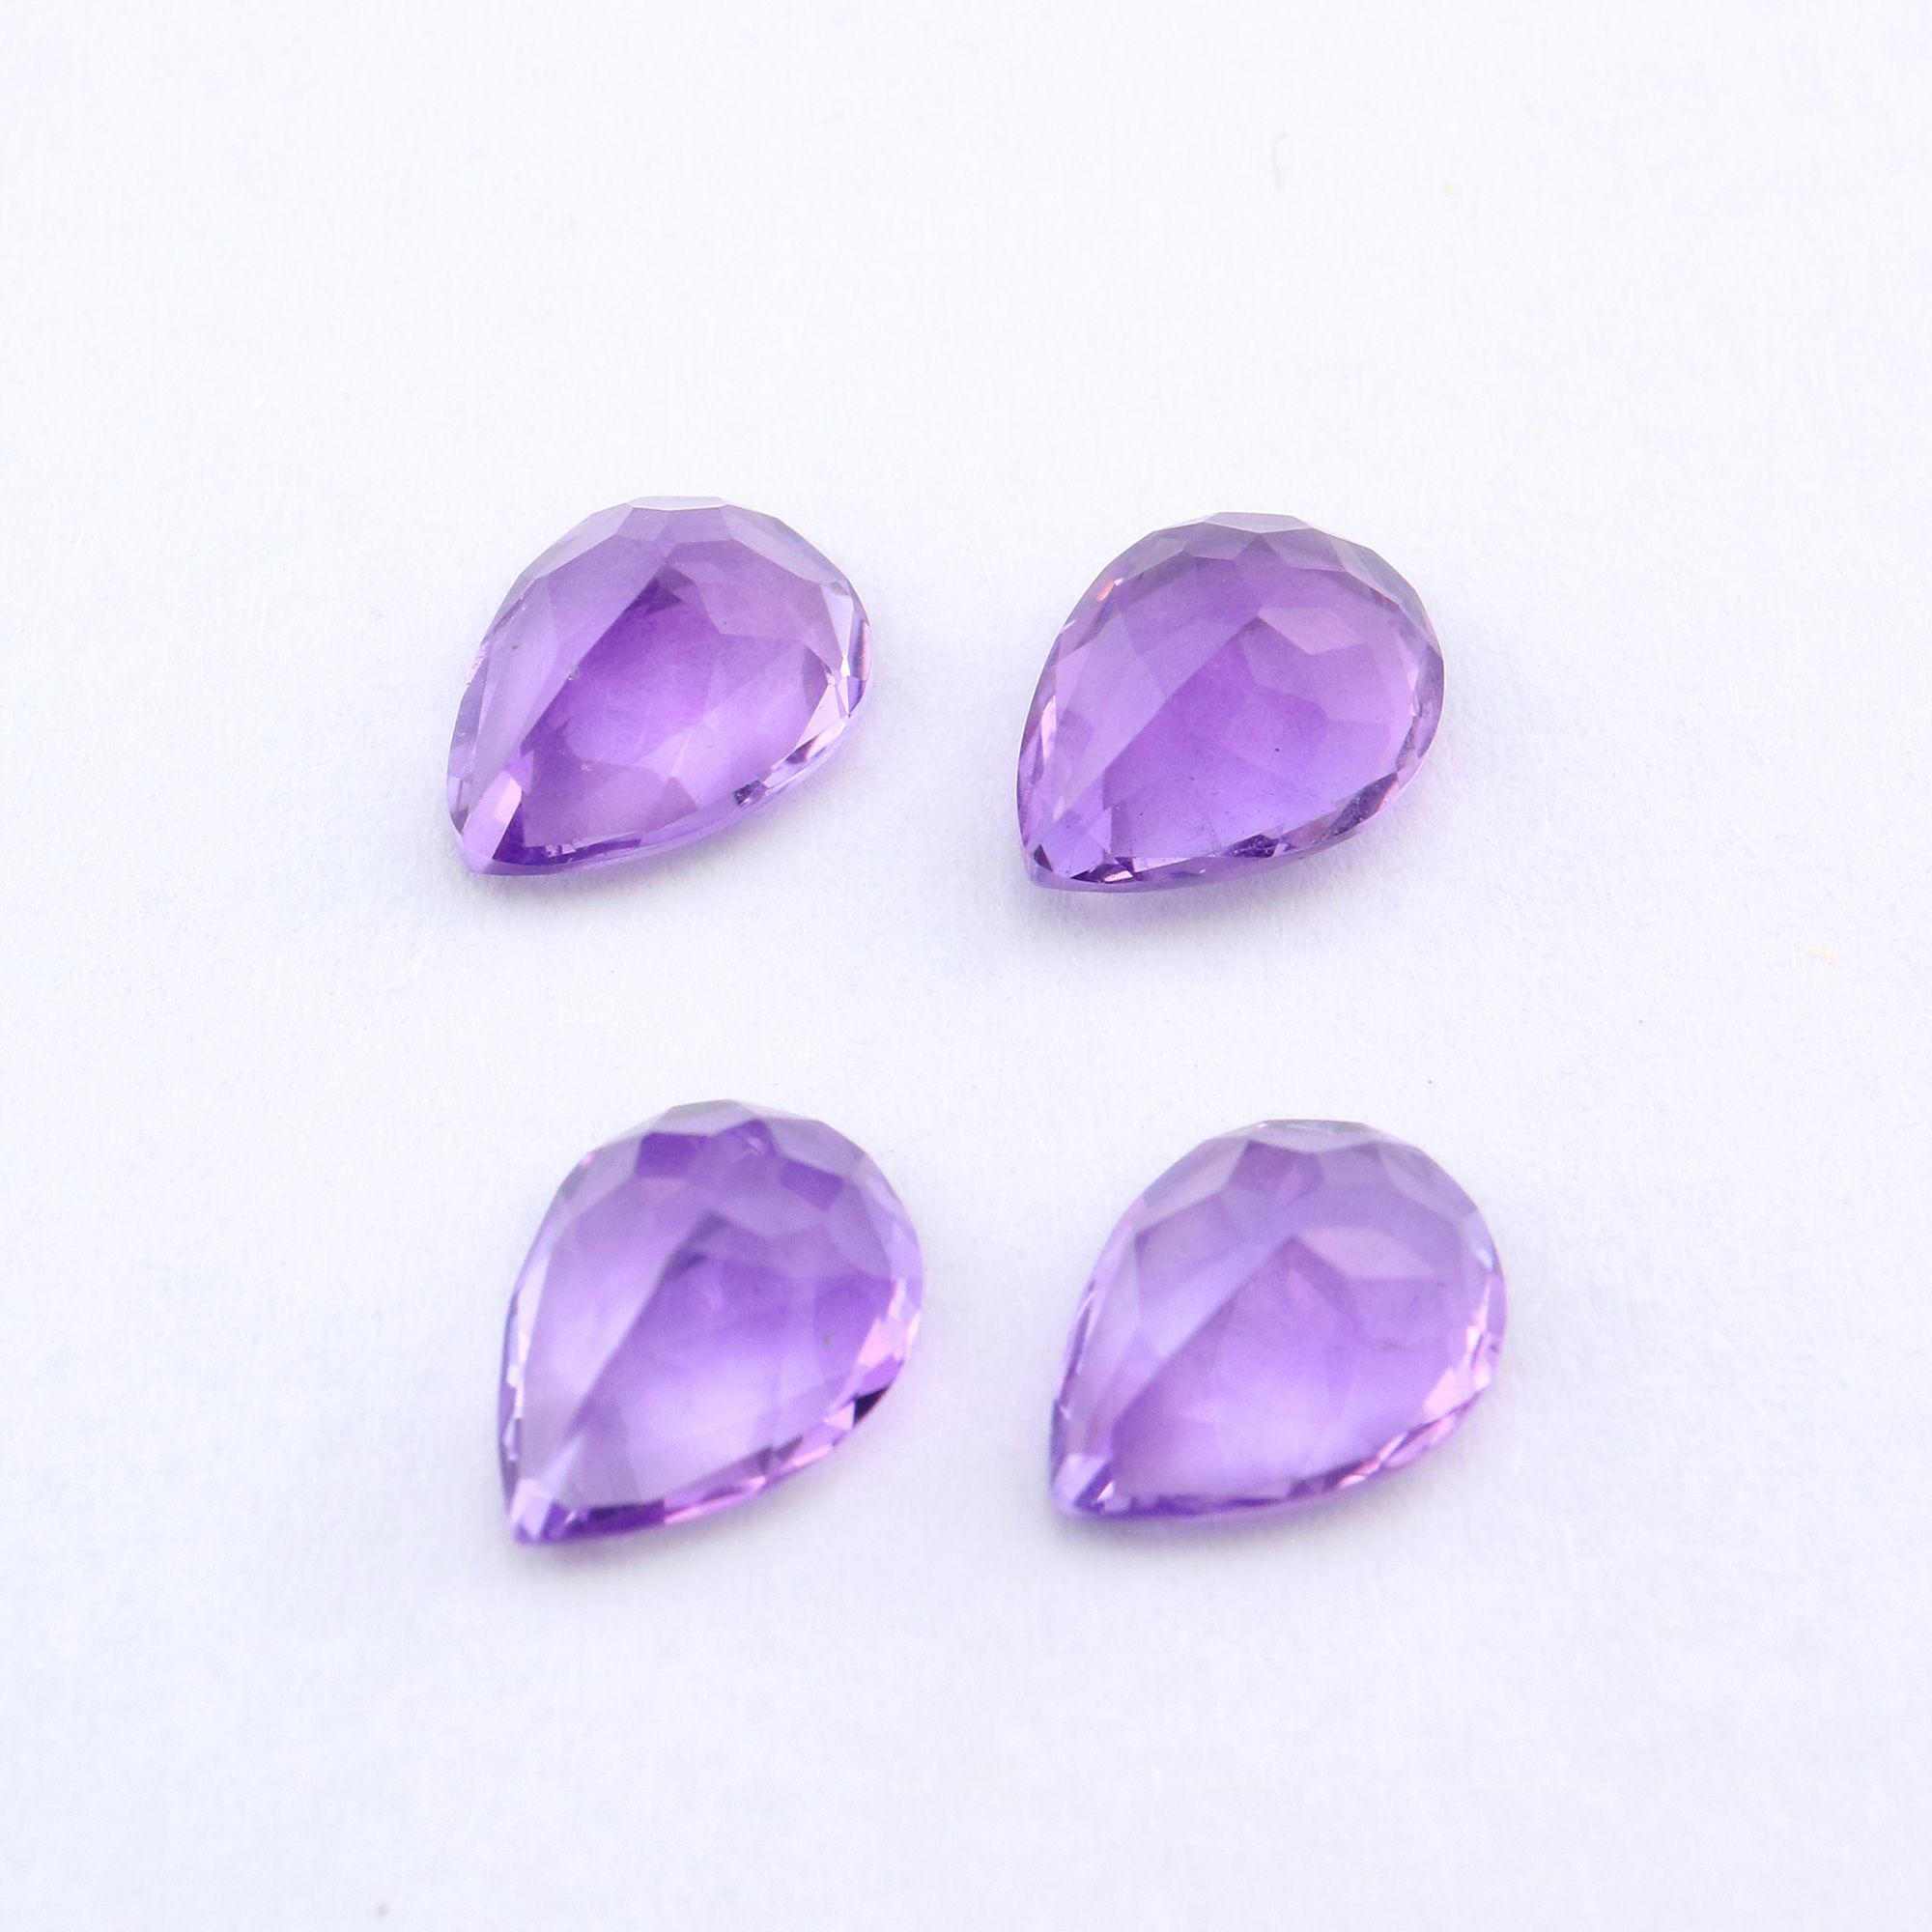 5Pcs Natural Purple Amethyst February Birthstone Pear Faceted Loose Gemstone Nature Semi Precious Stone DIY Jewelry Supplies 4150011 - Click Image to Close